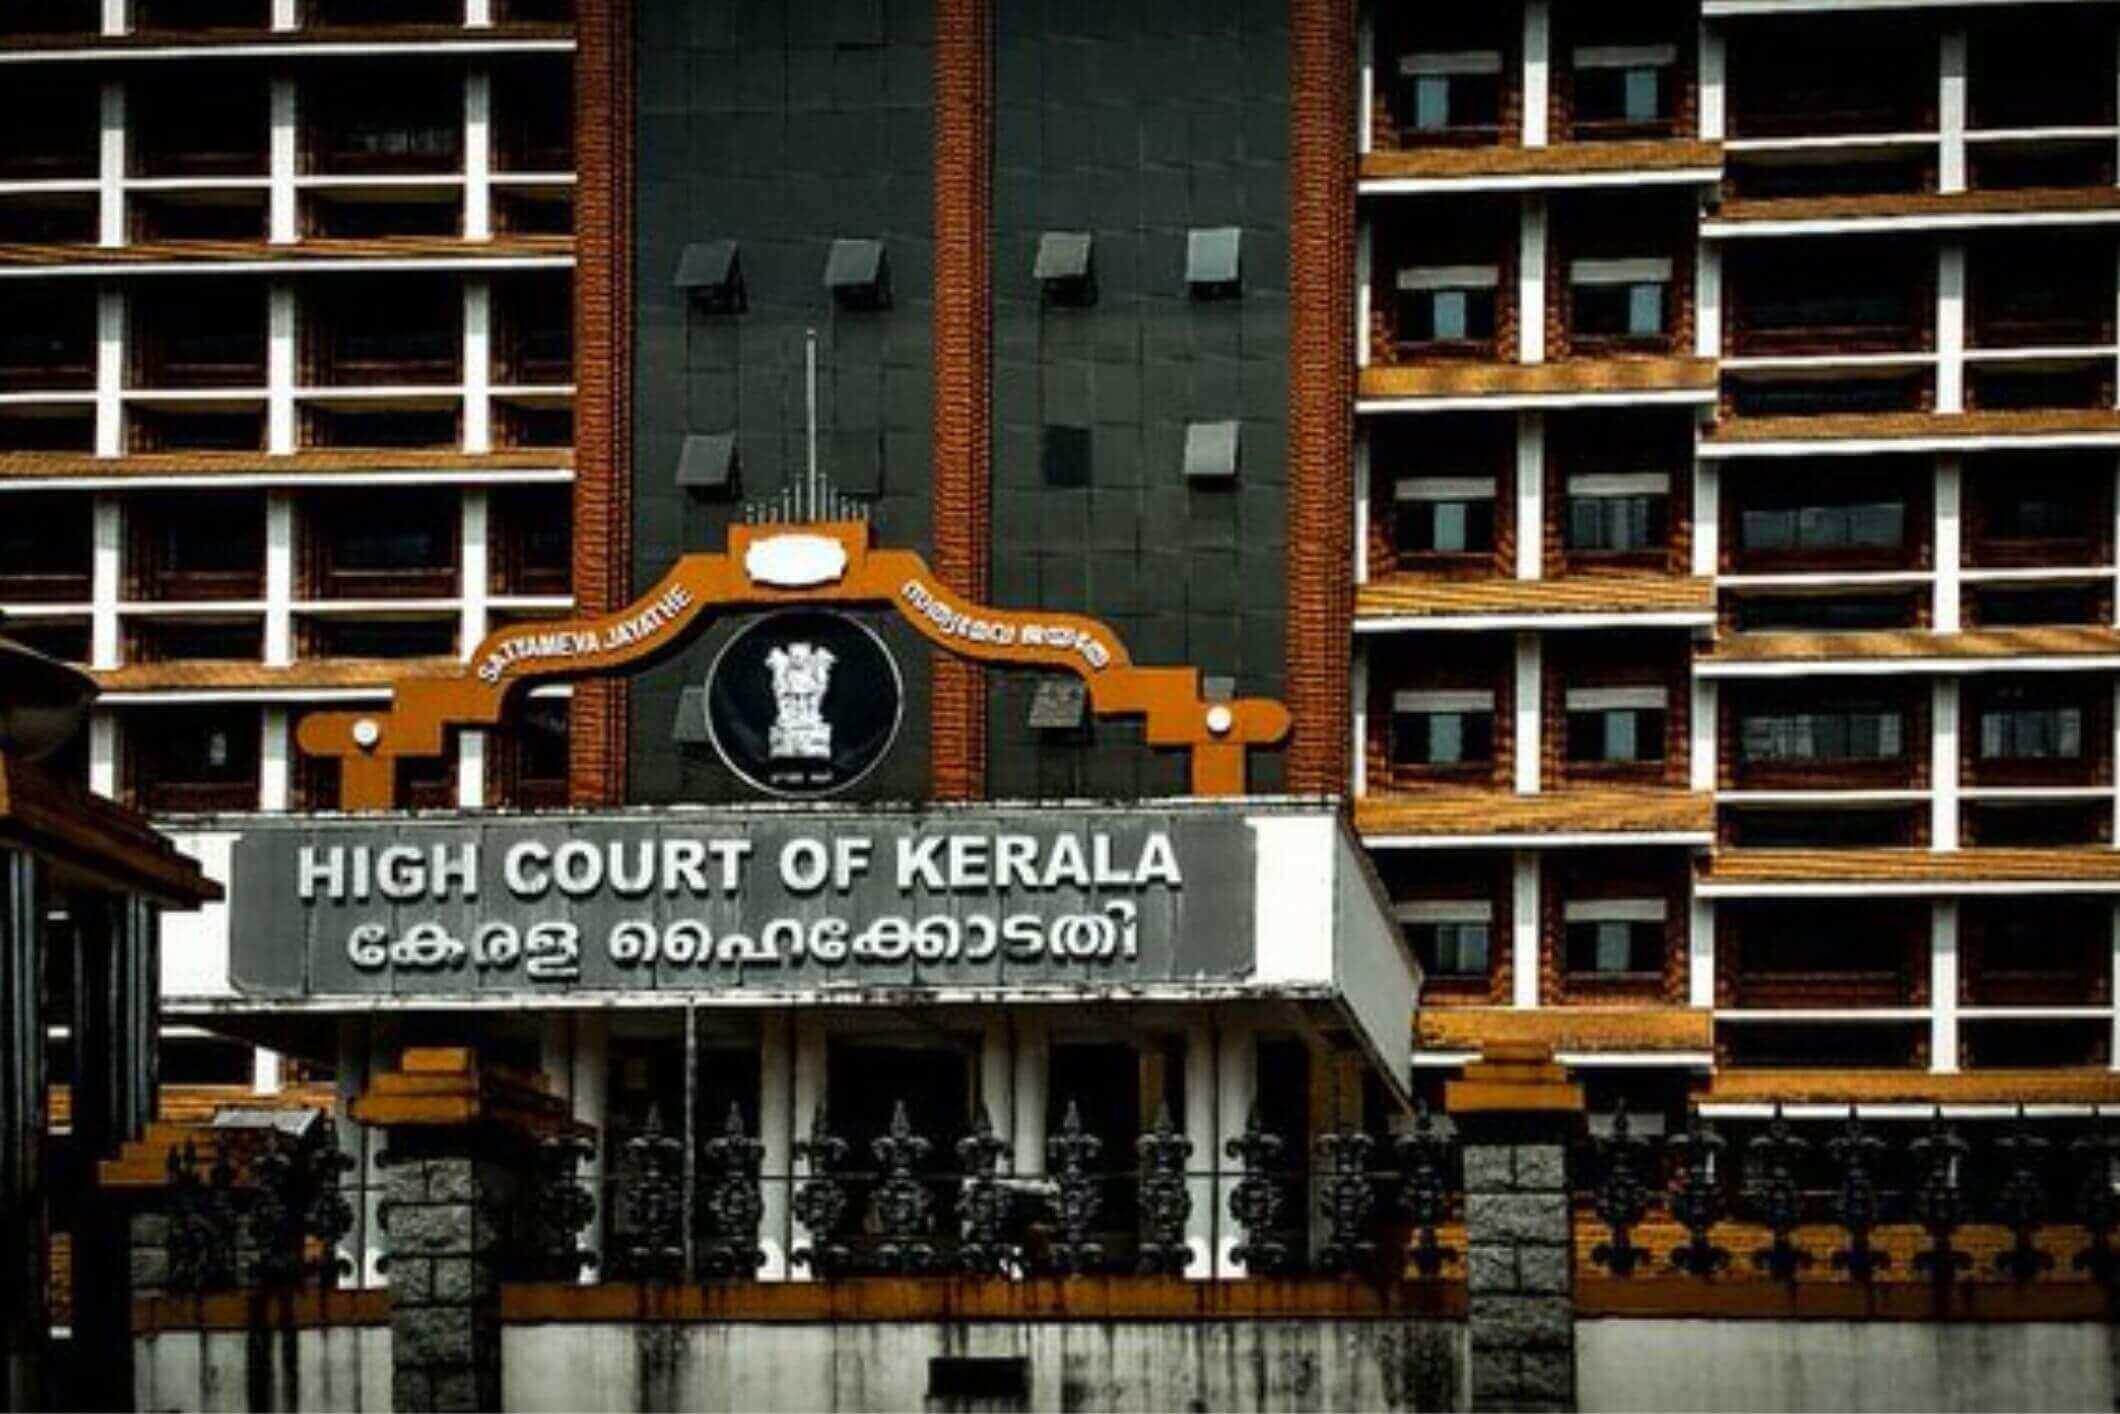 Kerala High Court Not Even Quran Says Mosque Should Be At Every Road Junction